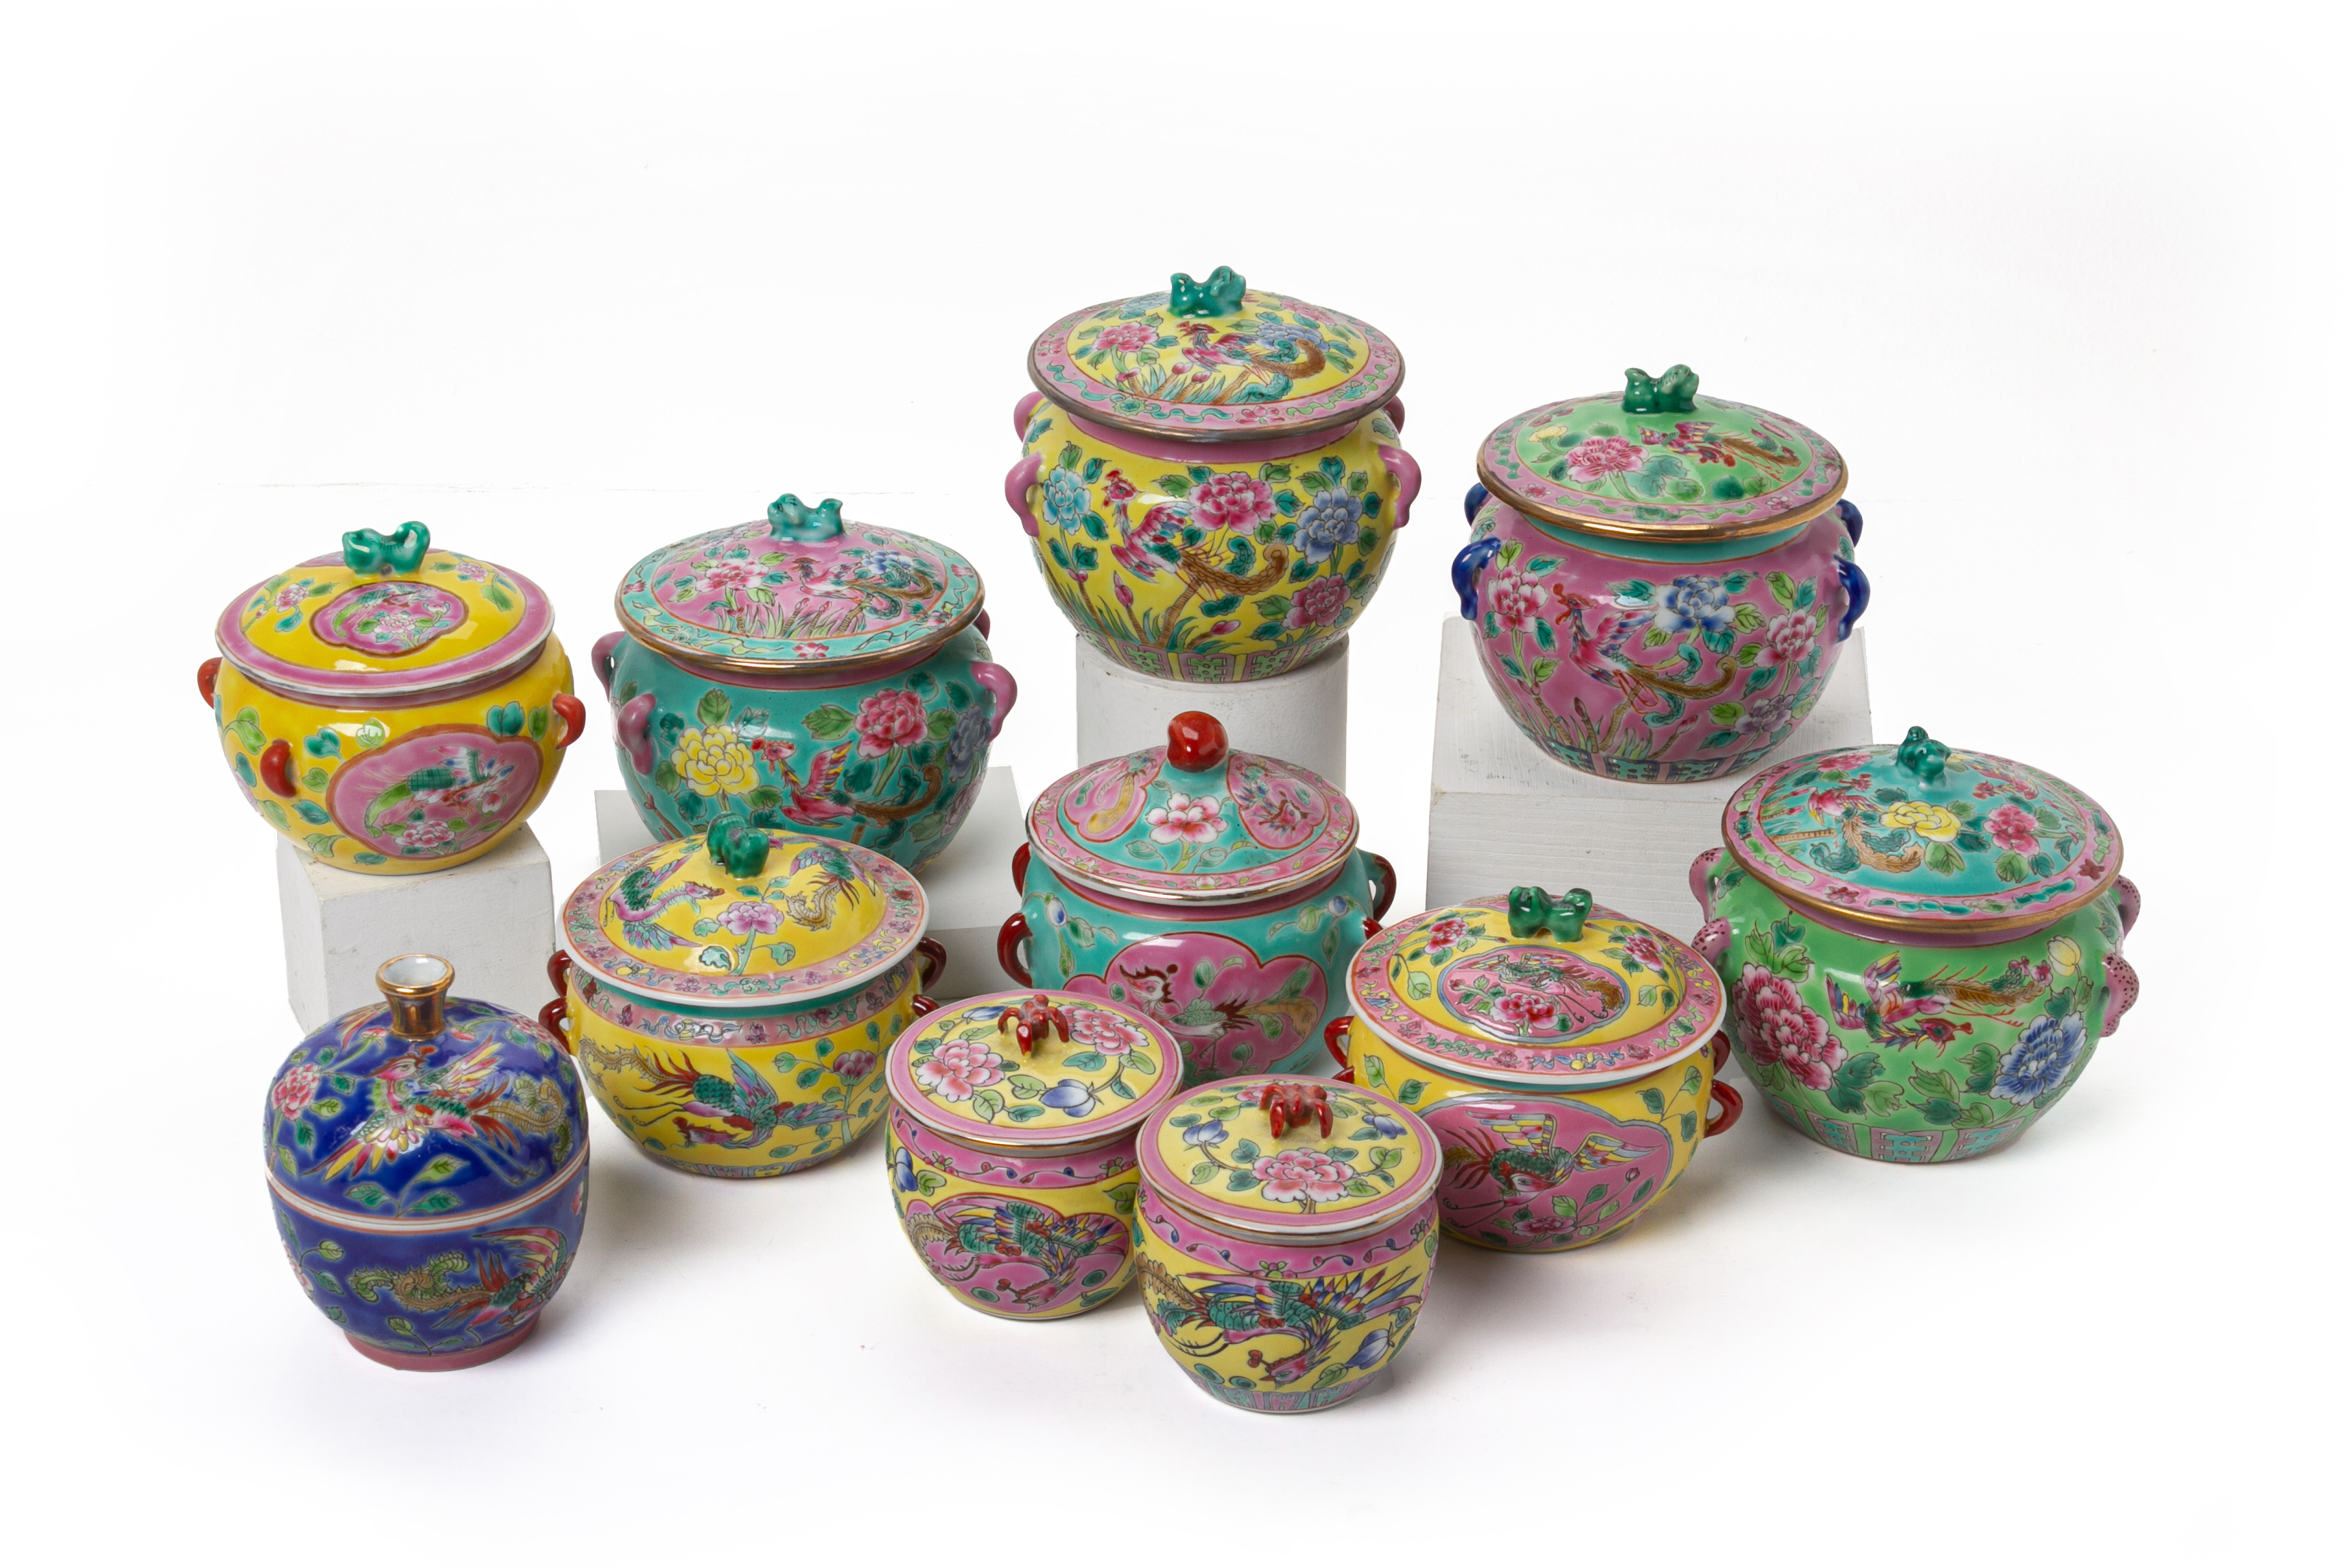 A COLLECTION OF PERANAKAN STYLE PORCELAIN ITEMS